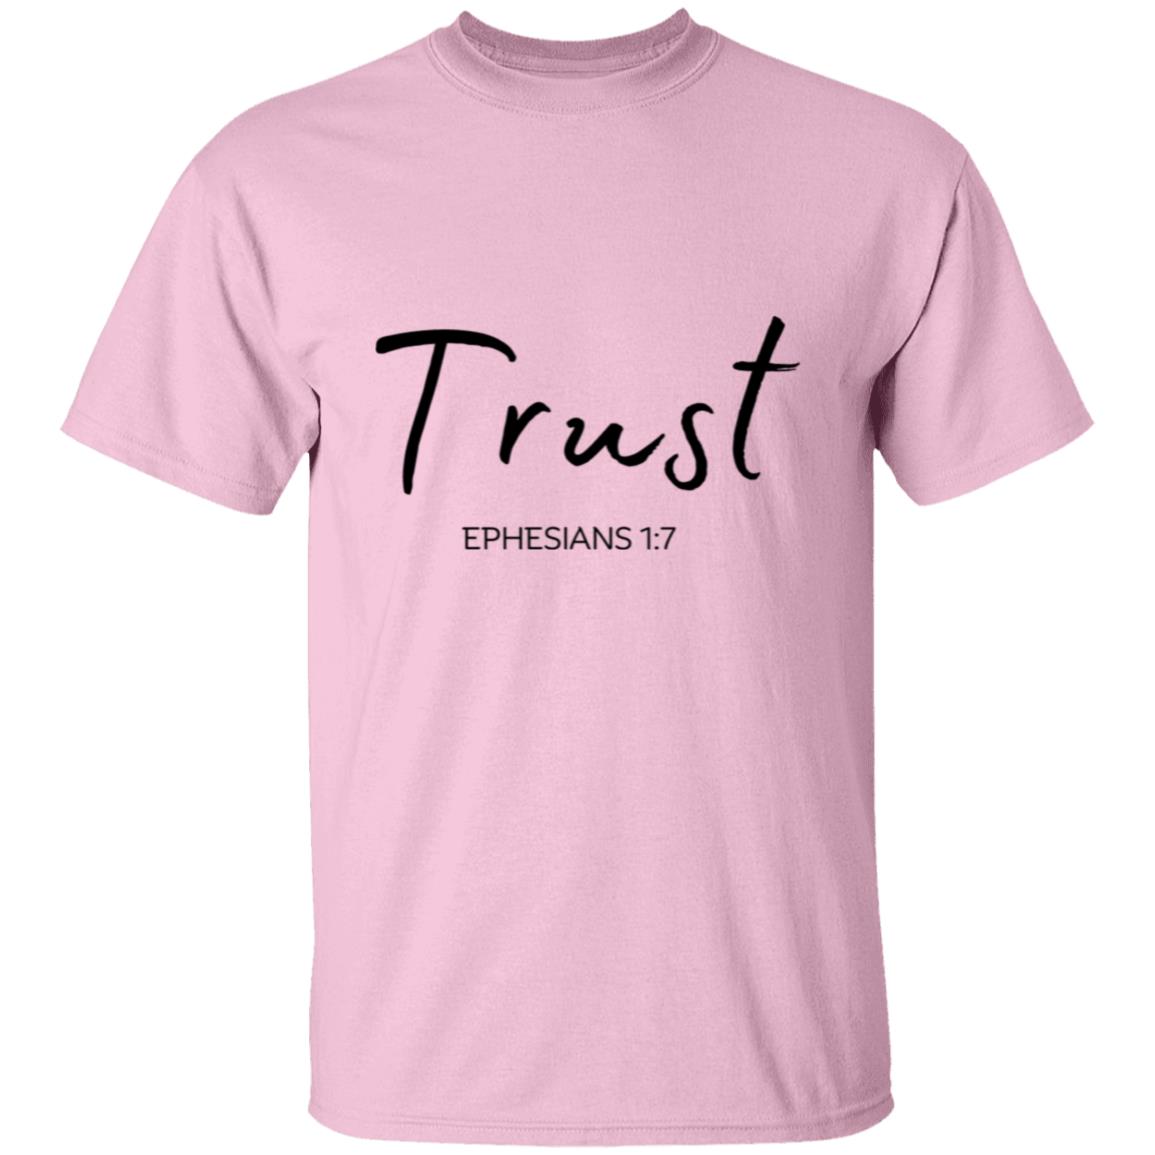 Get trendy with Trust (4) Trust T-Shirt - T-Shirts available at Good Gift Company. Grab yours for $21.95 today!